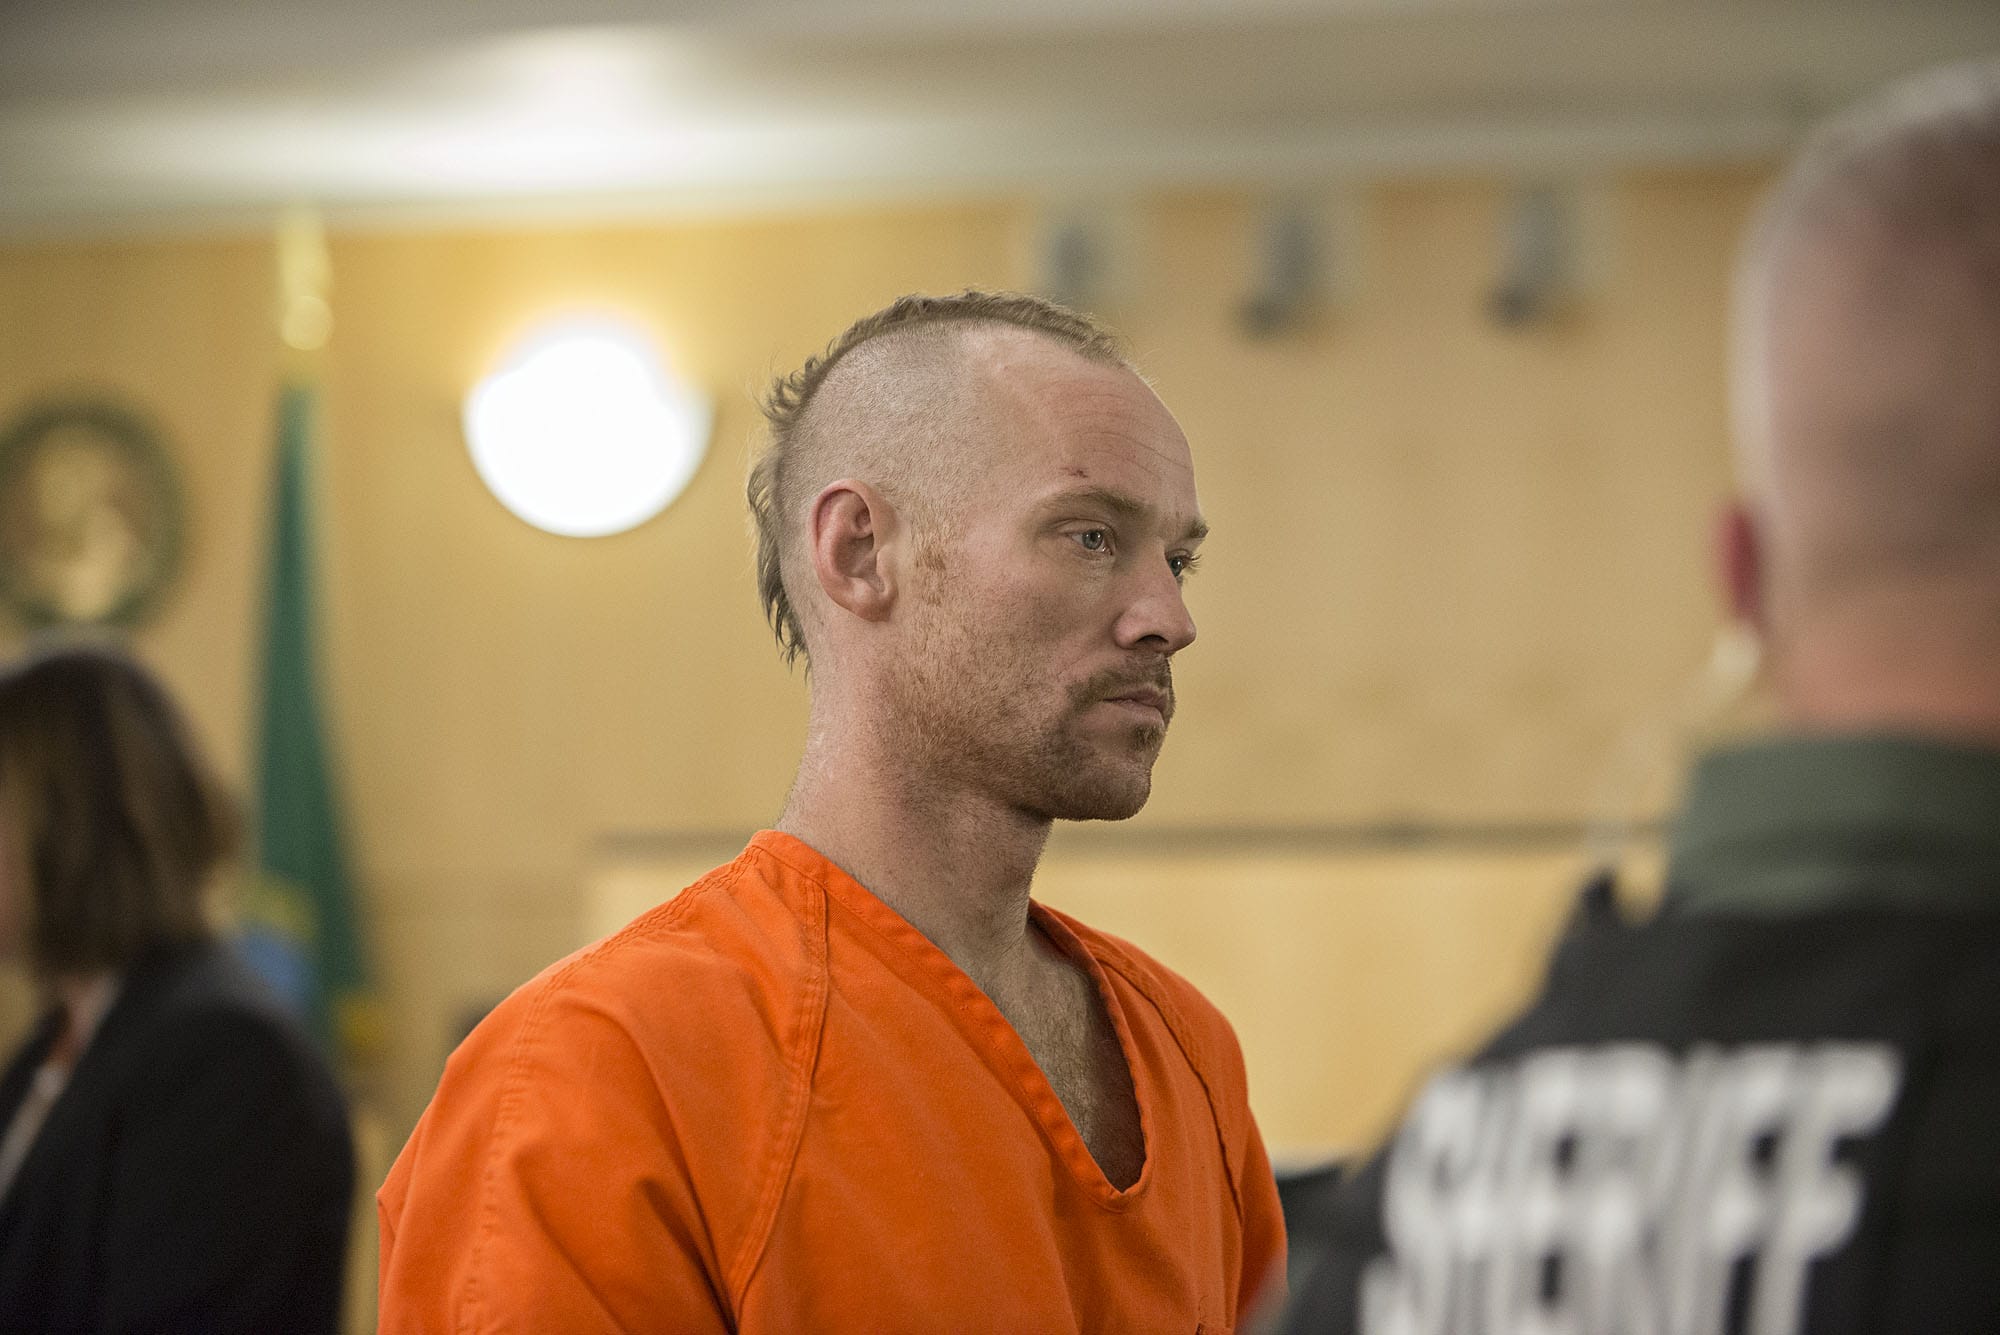 Steven Eric Lewis Jennings, 35, a transient, makes a first appearance Monday in Clark County Superior Court in connection with a US Bank robbery earlier this month.